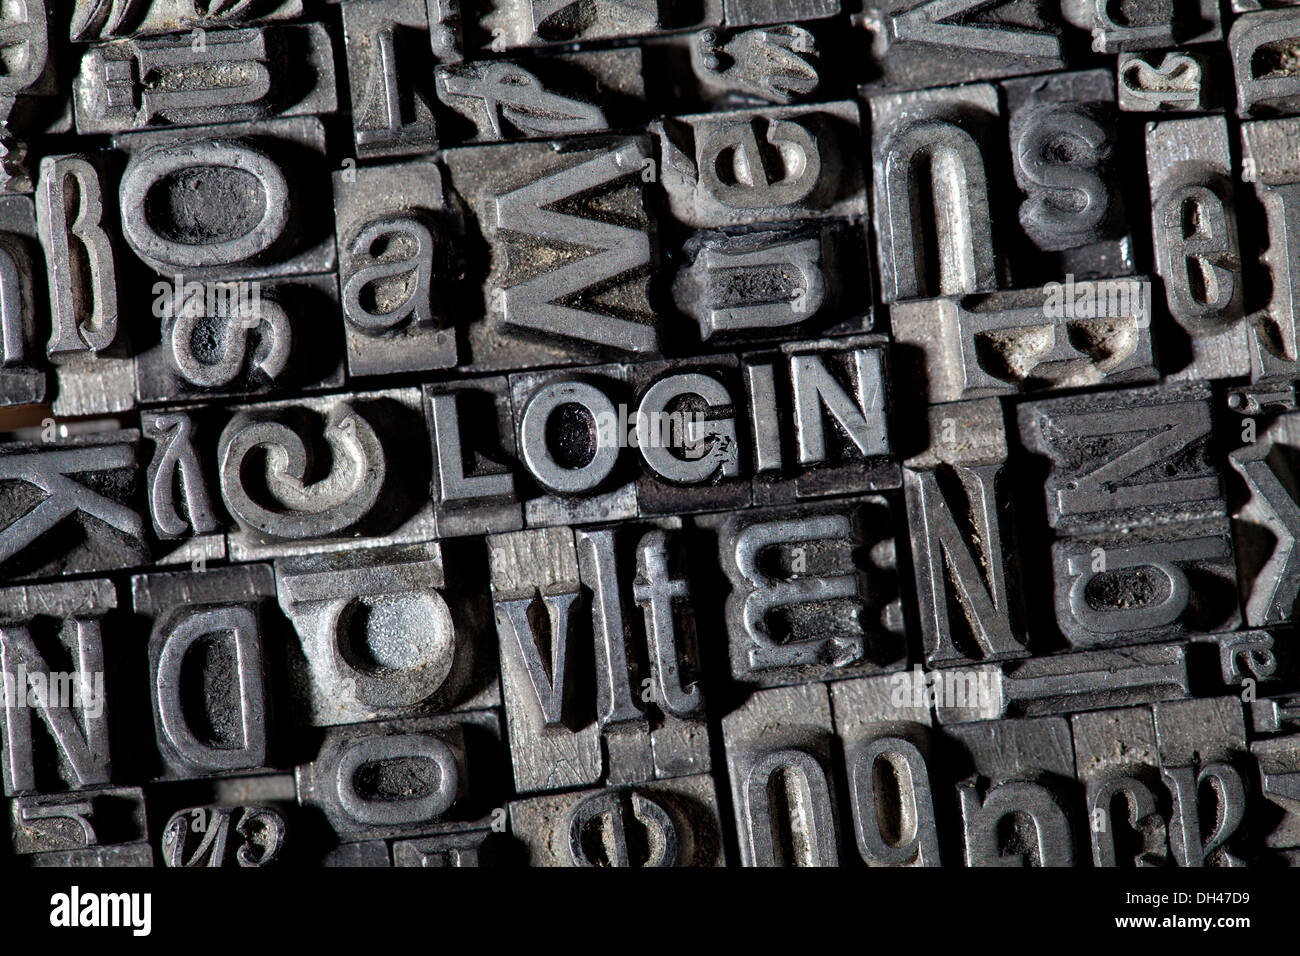 Old lead letters forming the word 'LOGIN' Stock Photo